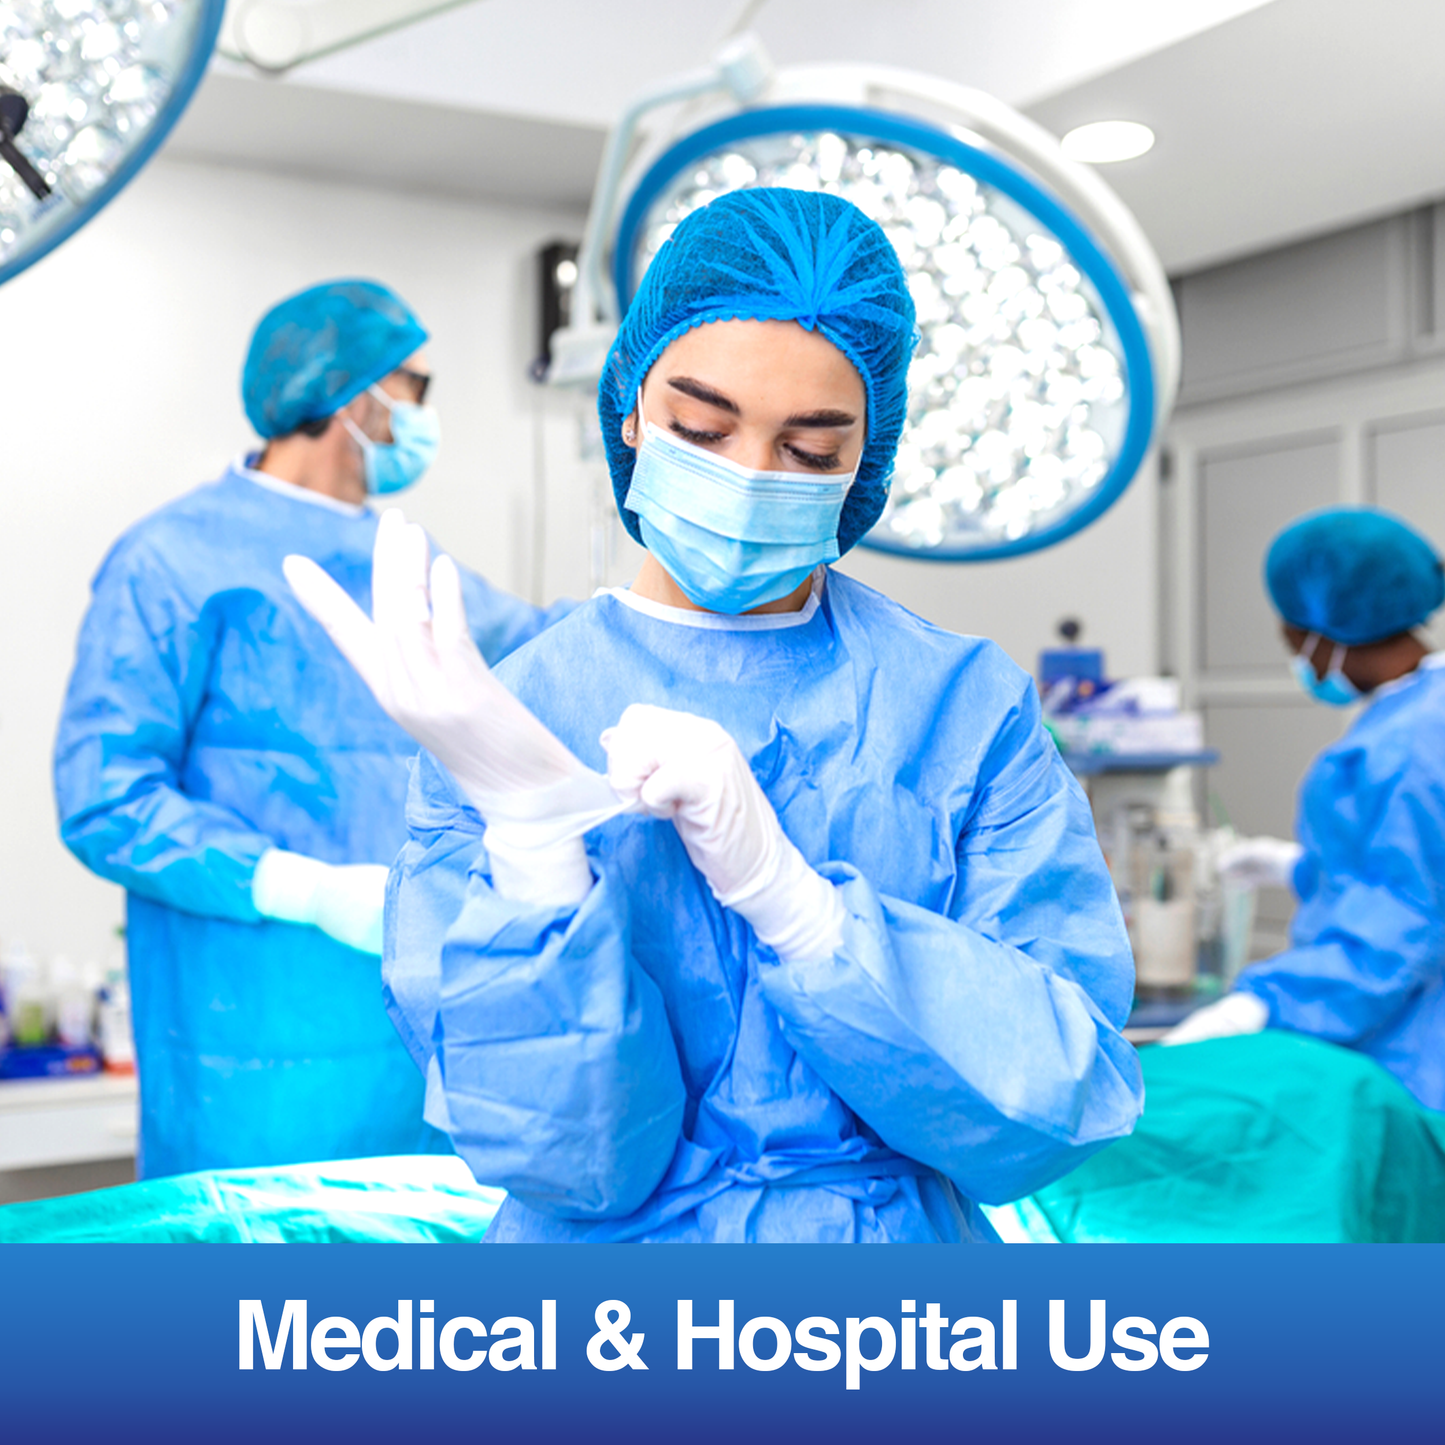 Level 3 SMS Disposable Surgical Gown - 40 PCS/BOX for $69.90 - Wholesale $1.74/Pcs - USA Medical Supply